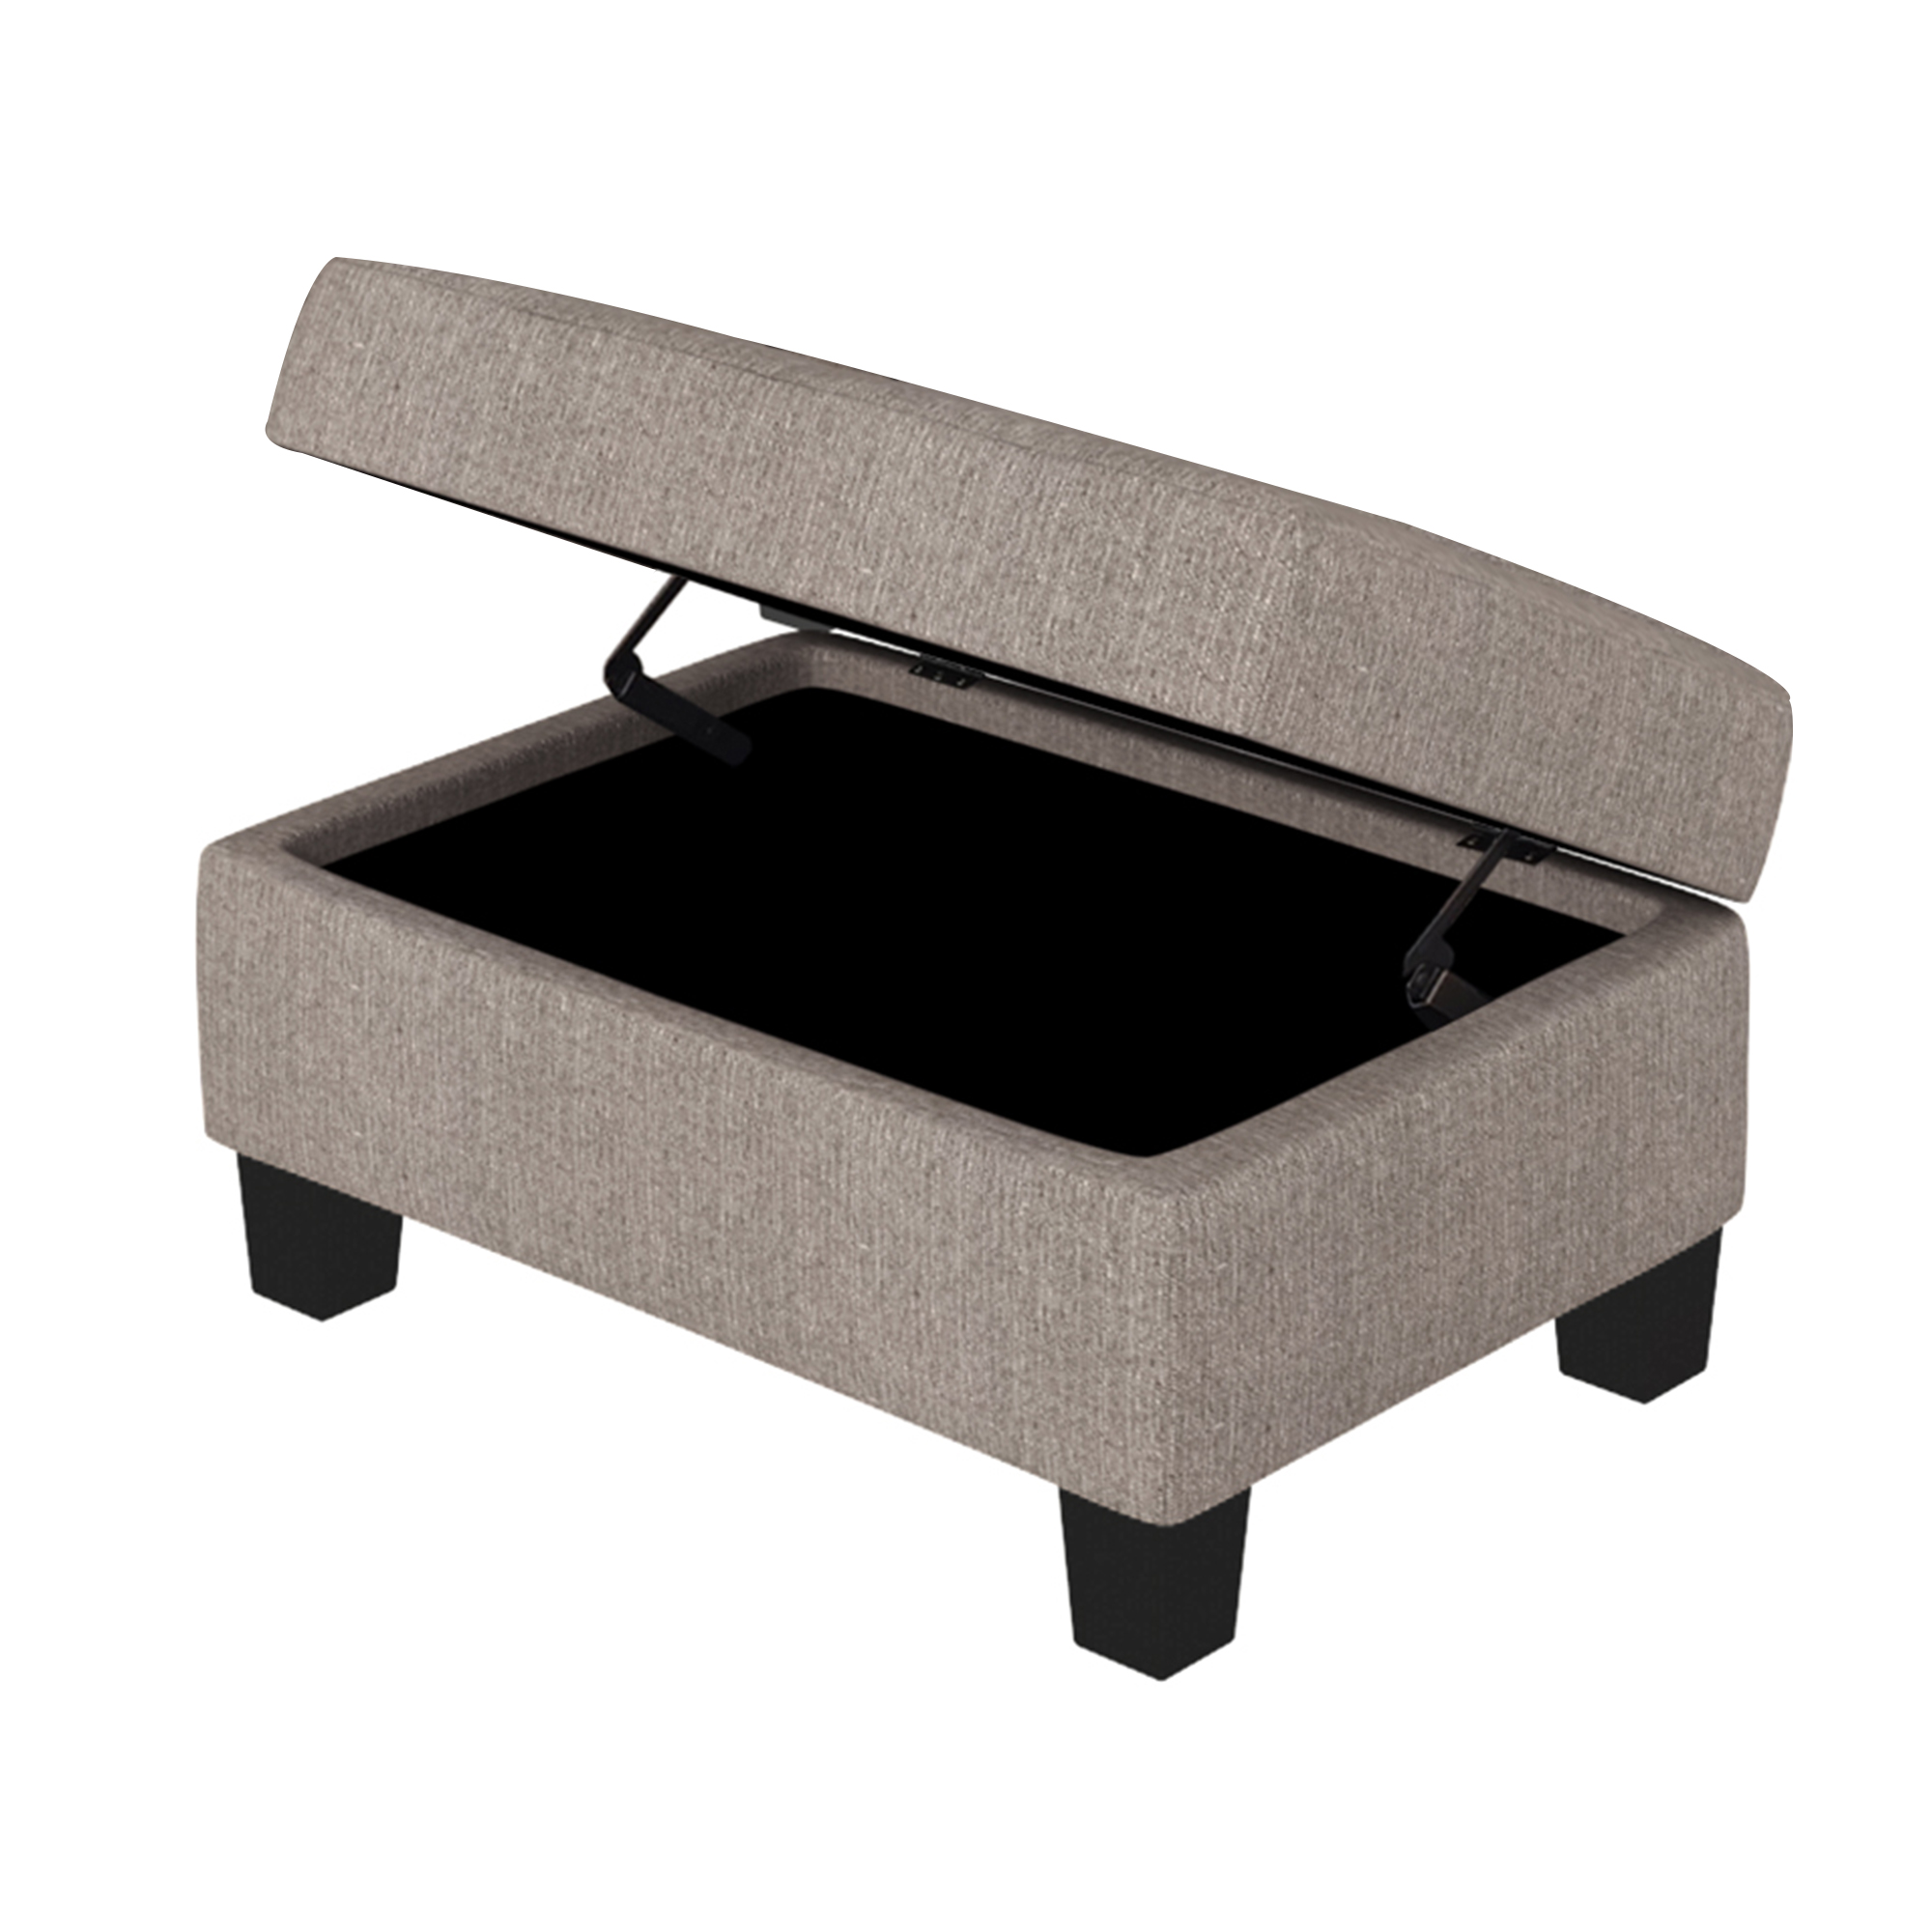 L-Shape Corner Sofa With Storage Ottoman & Cup Holders, Brown - SG000244AAA